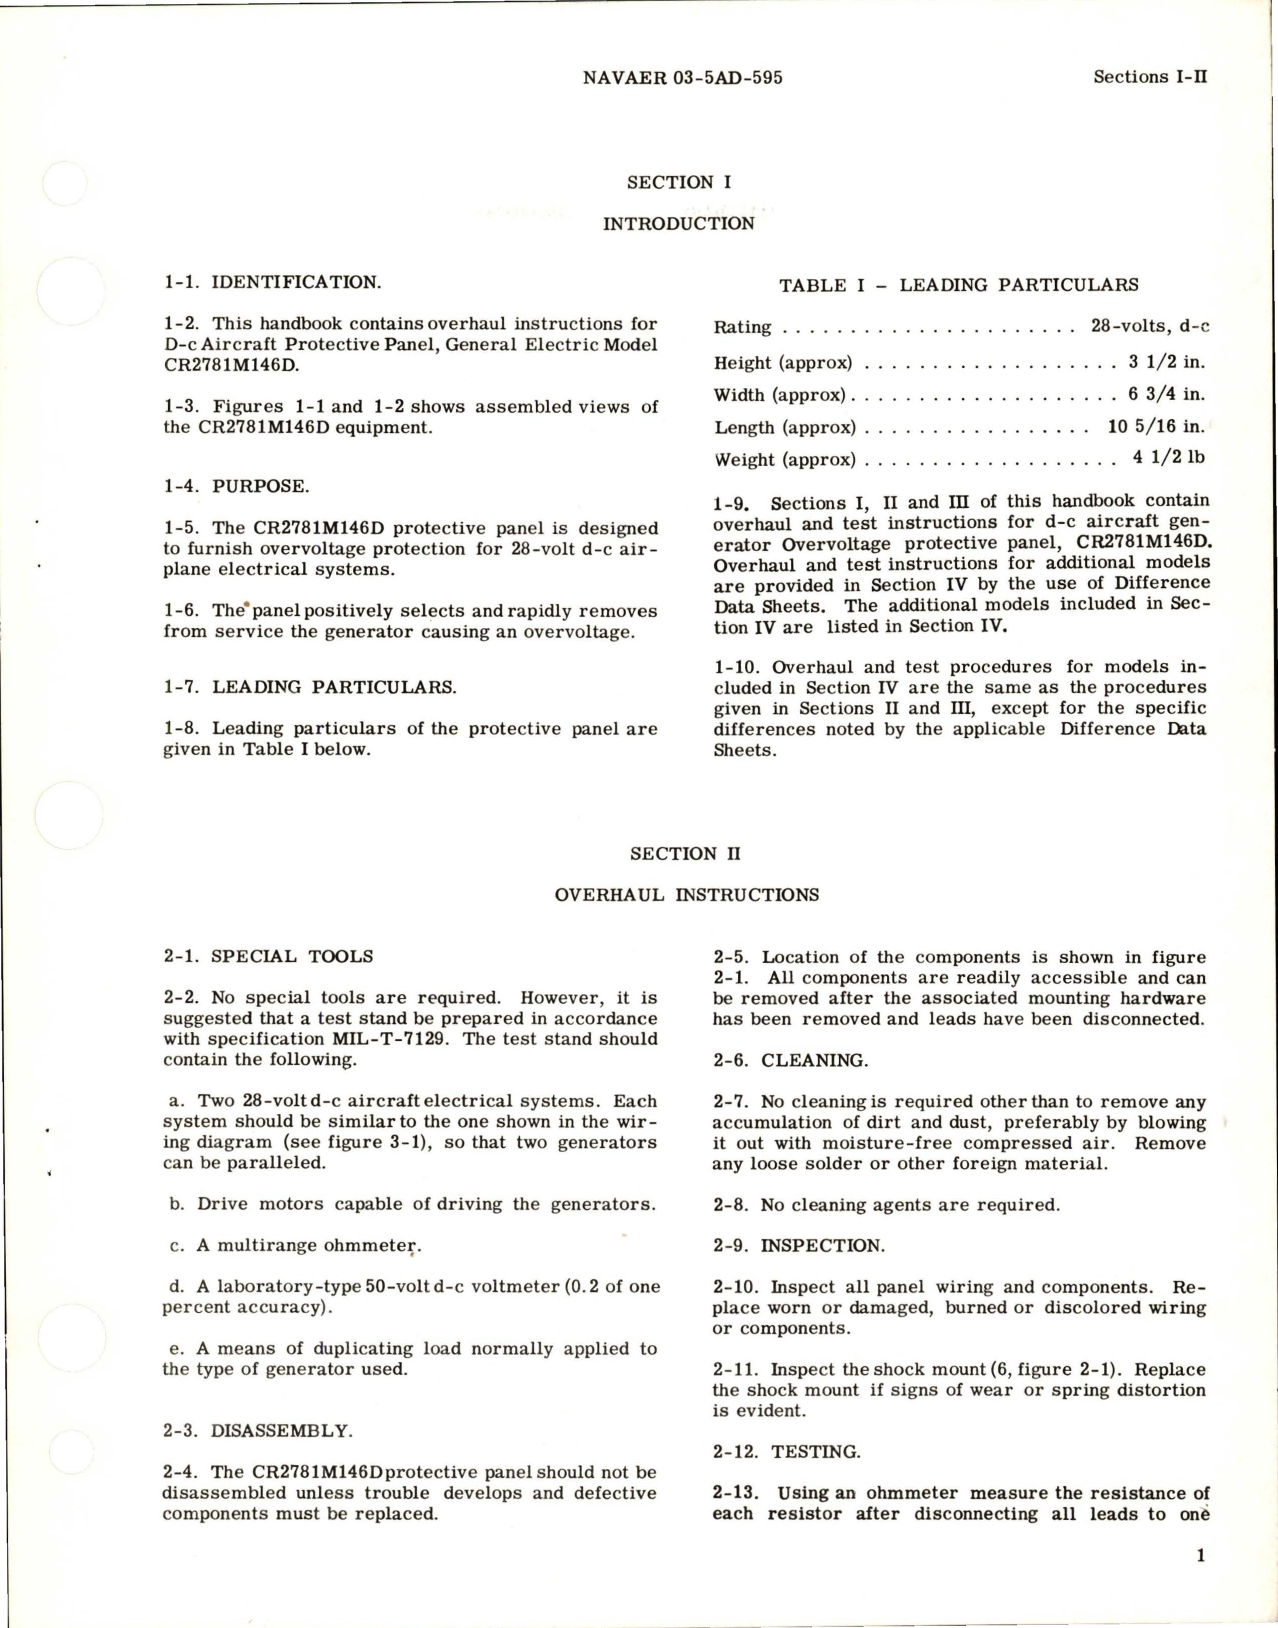 Sample page 5 from AirCorps Library document: Overhaul Instructions for Overvoltage Protective Panel for DC Generator - Models CR2781M146D and CR2781M146F 